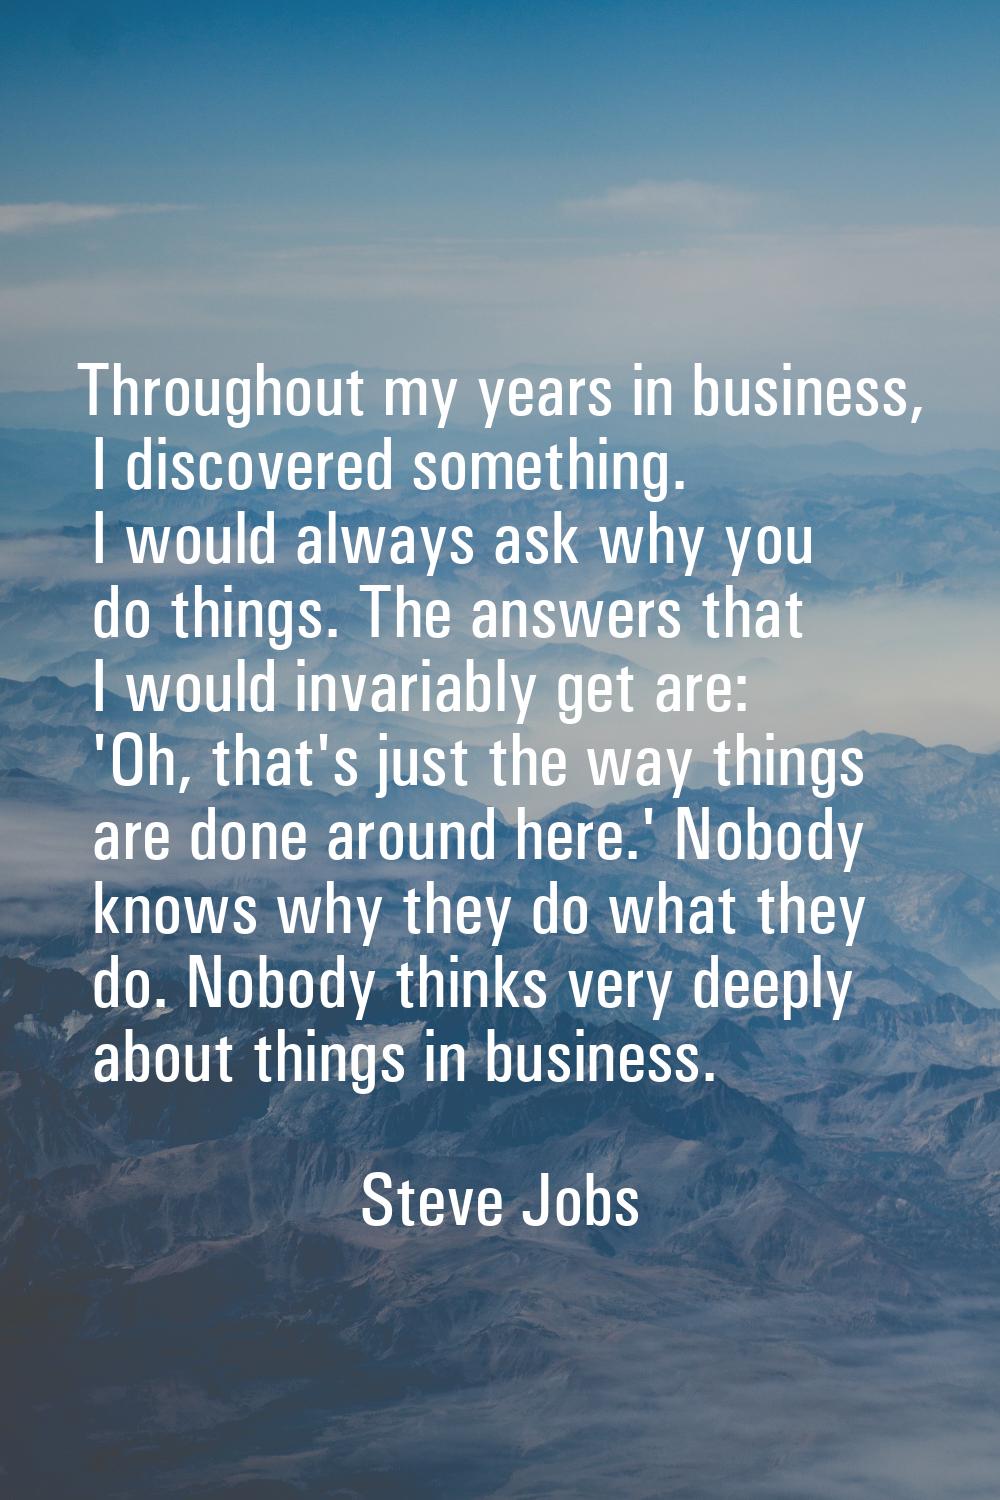 Throughout my years in business, I discovered something. I would always ask why you do things. The 